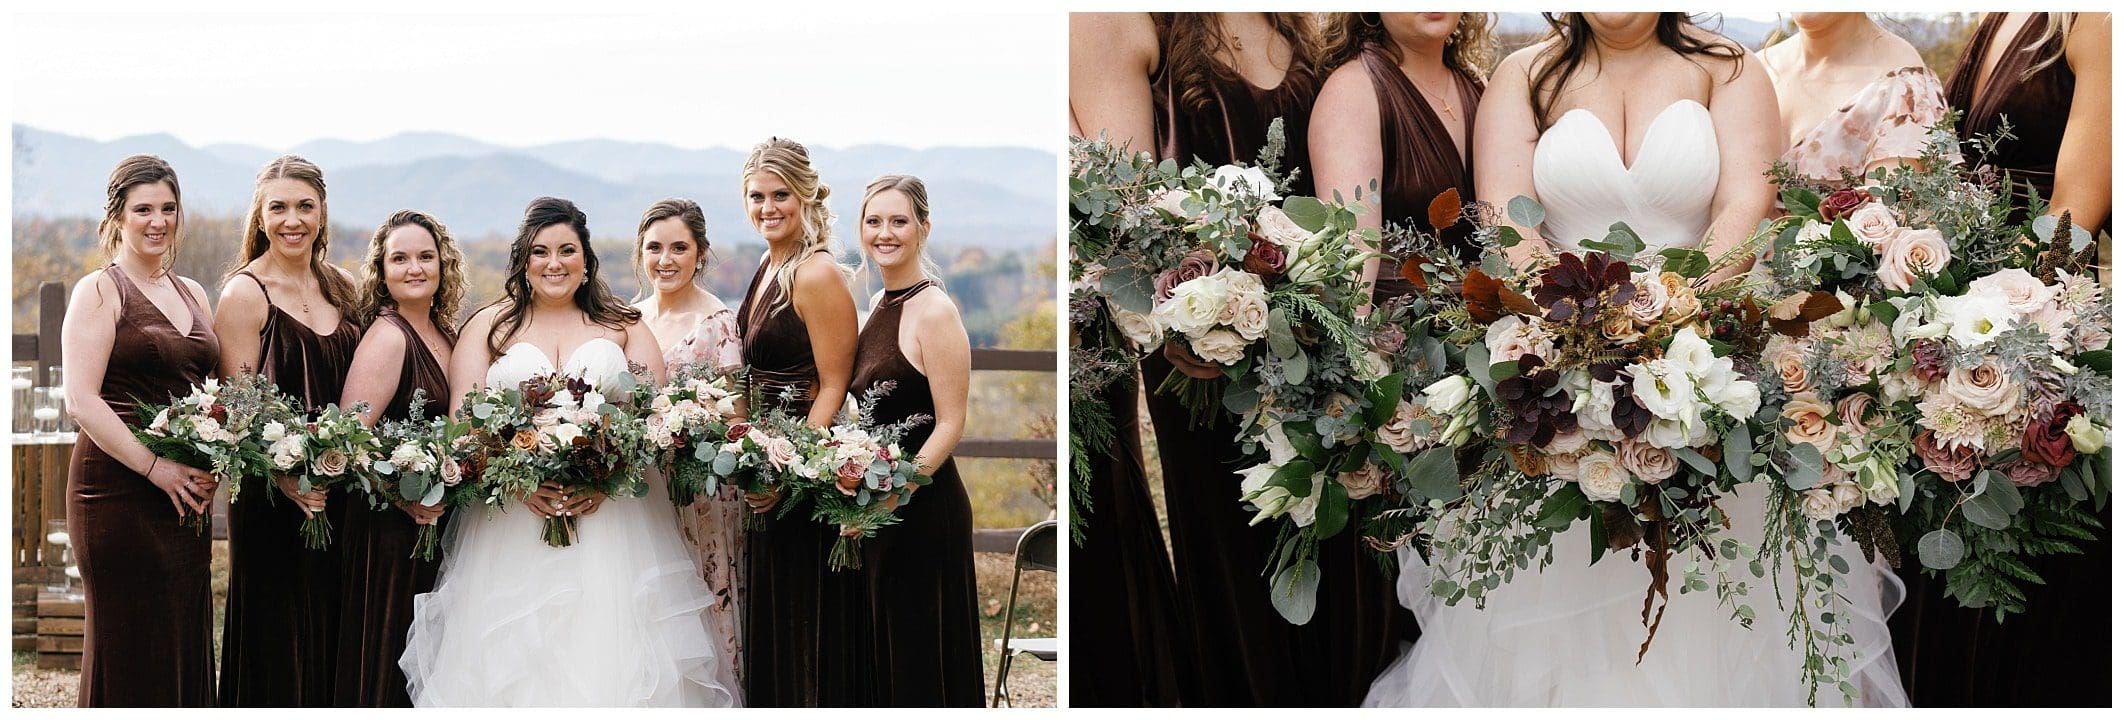 bride and bridesmaids posing outdoors with bouquets for a November wedding